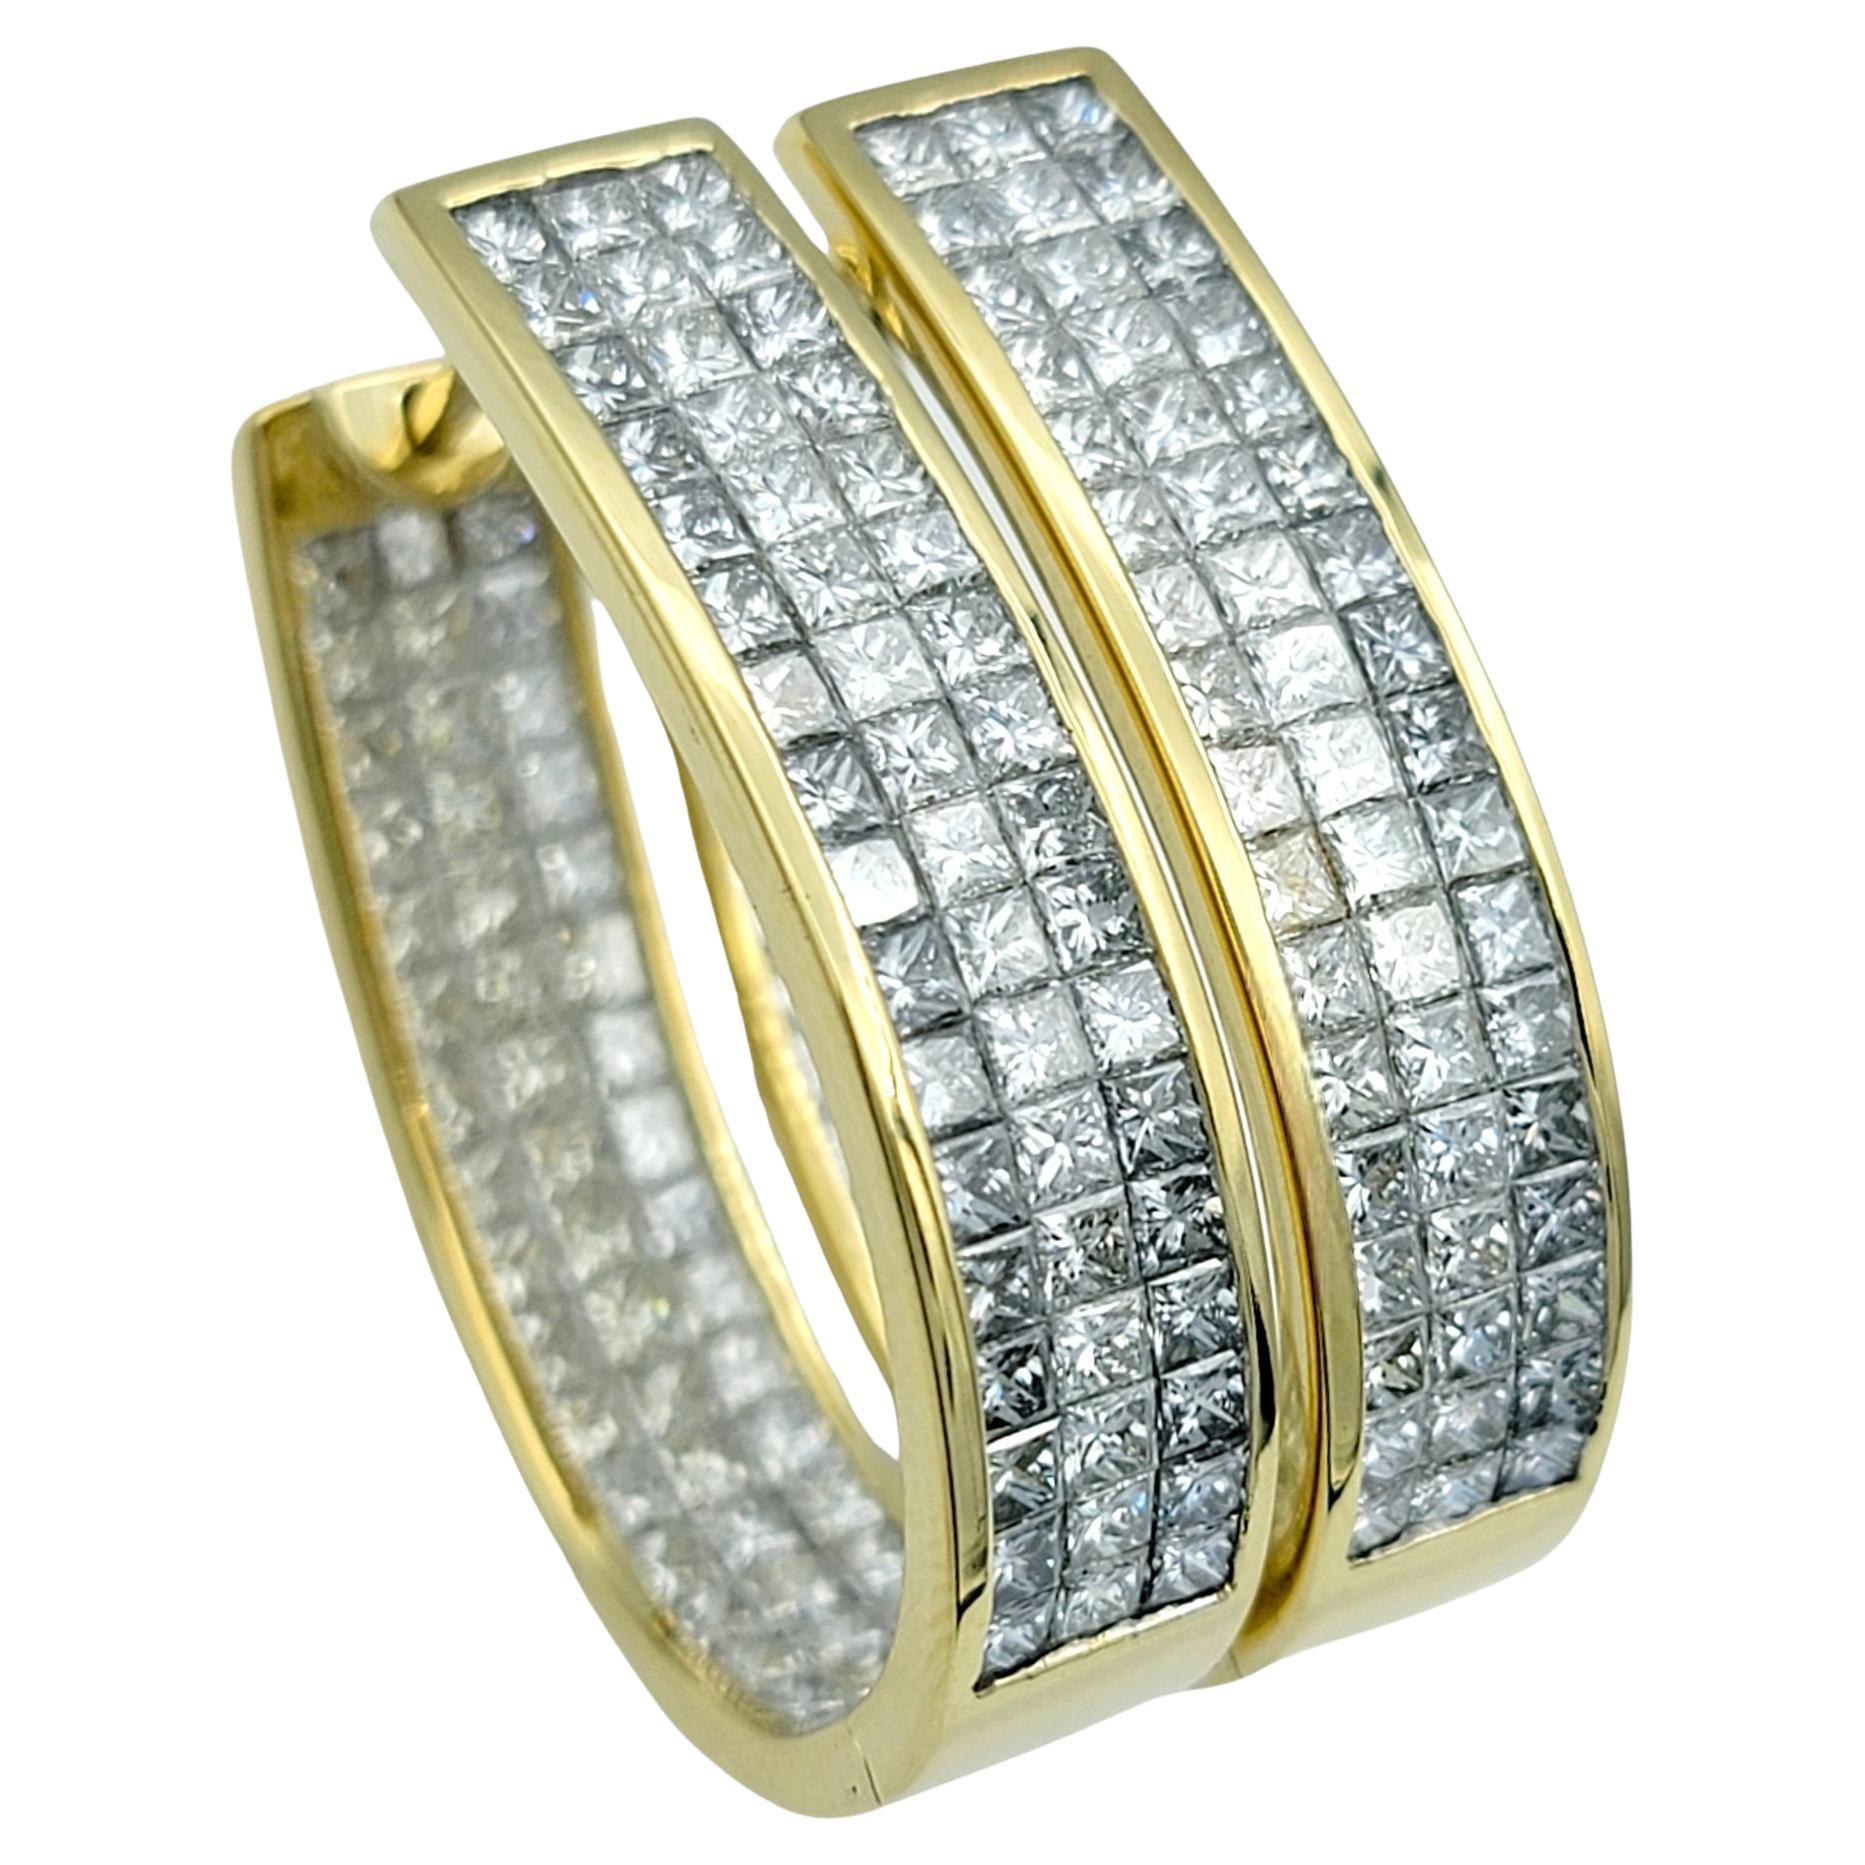 These diamond hoop earrings epitomize luxury and sophistication with their elegant design and exquisite craftsmanship. Crafted in 18 karat yellow gold, each hoop features three rows of dazzling princess-cut diamonds, invisibly set to create a